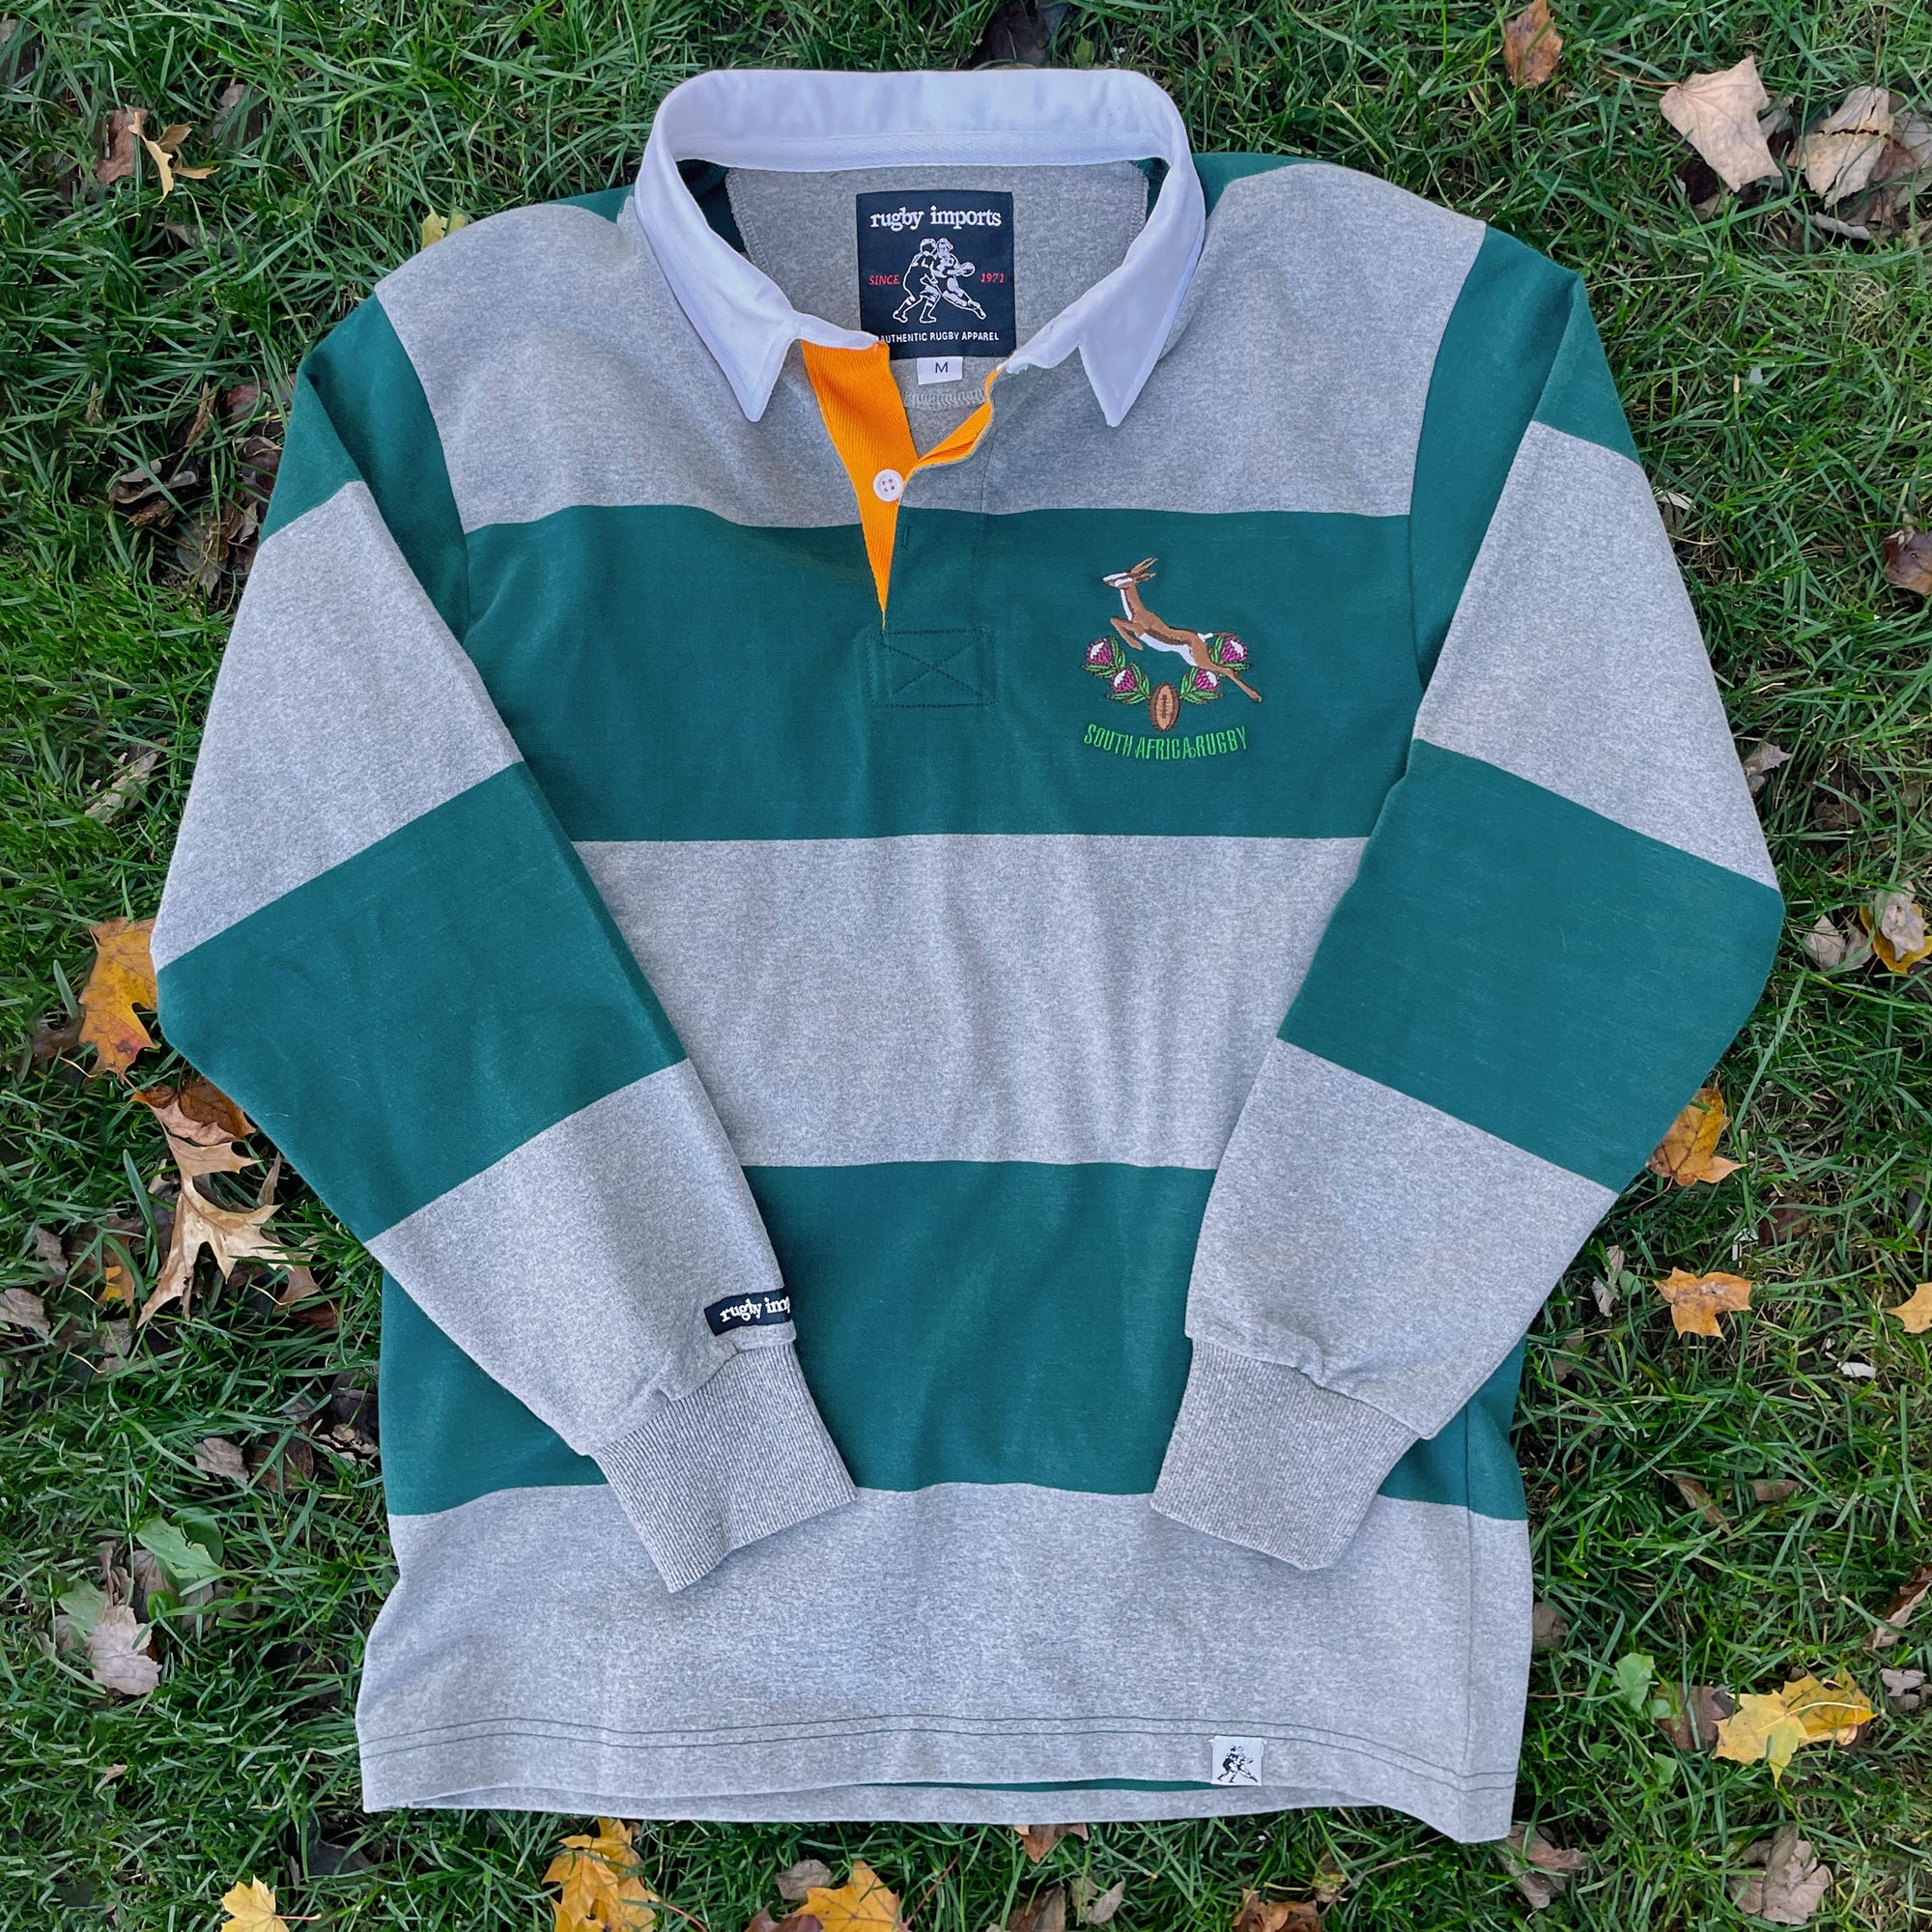 Rugby Imports South Africa Grey Hoops Rugby Jersey